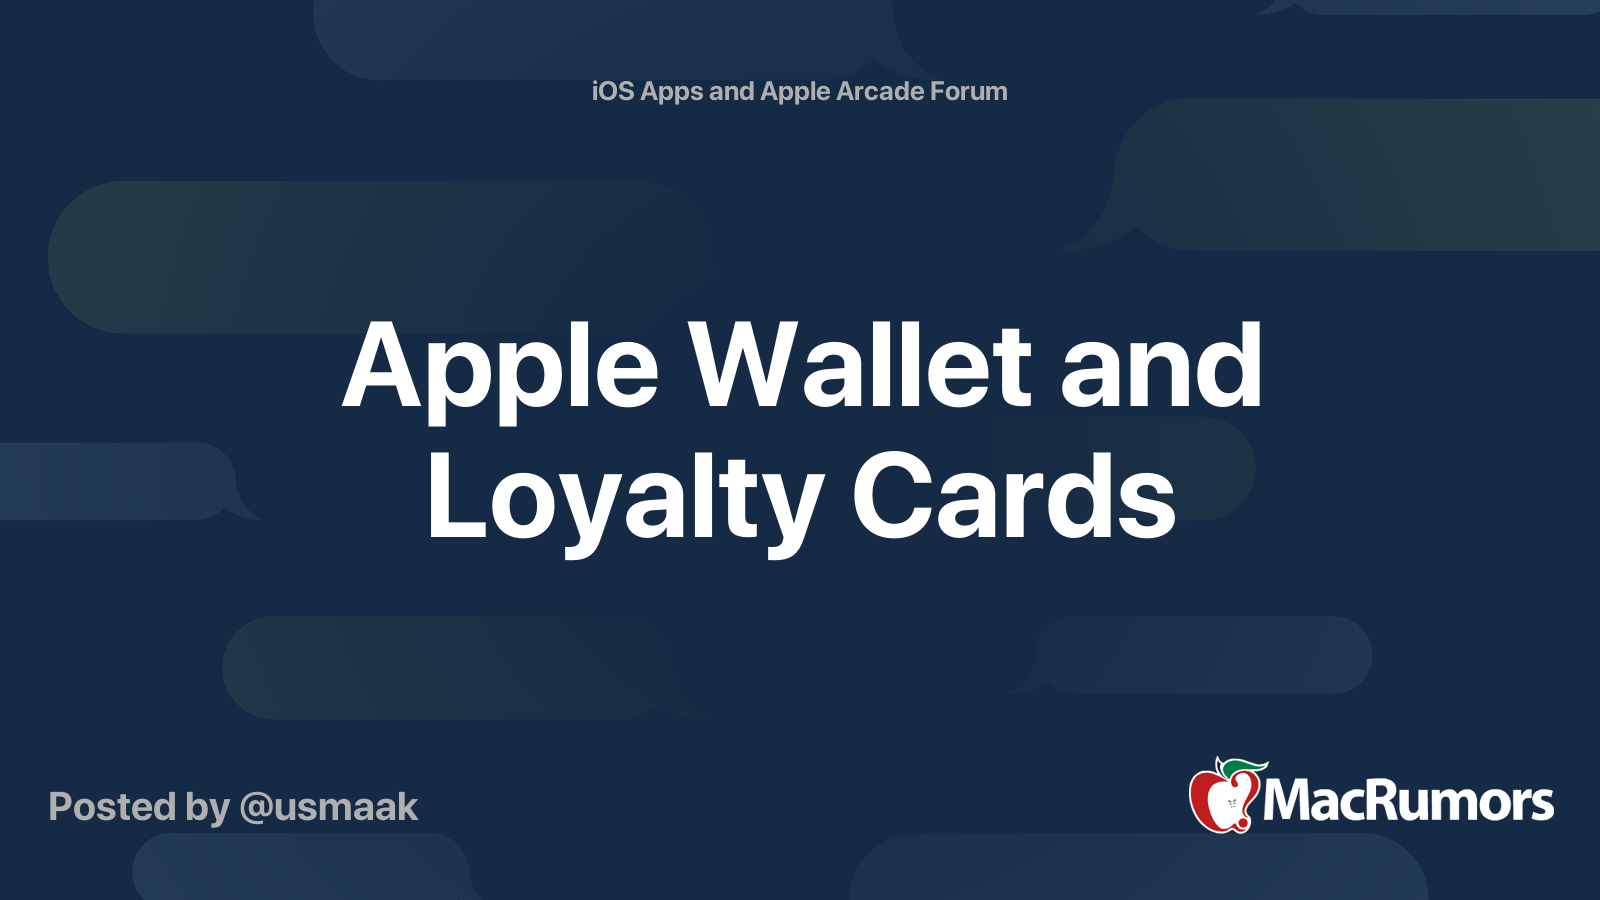 apple-wallet-and-loyalty-cards-macrumors-forums